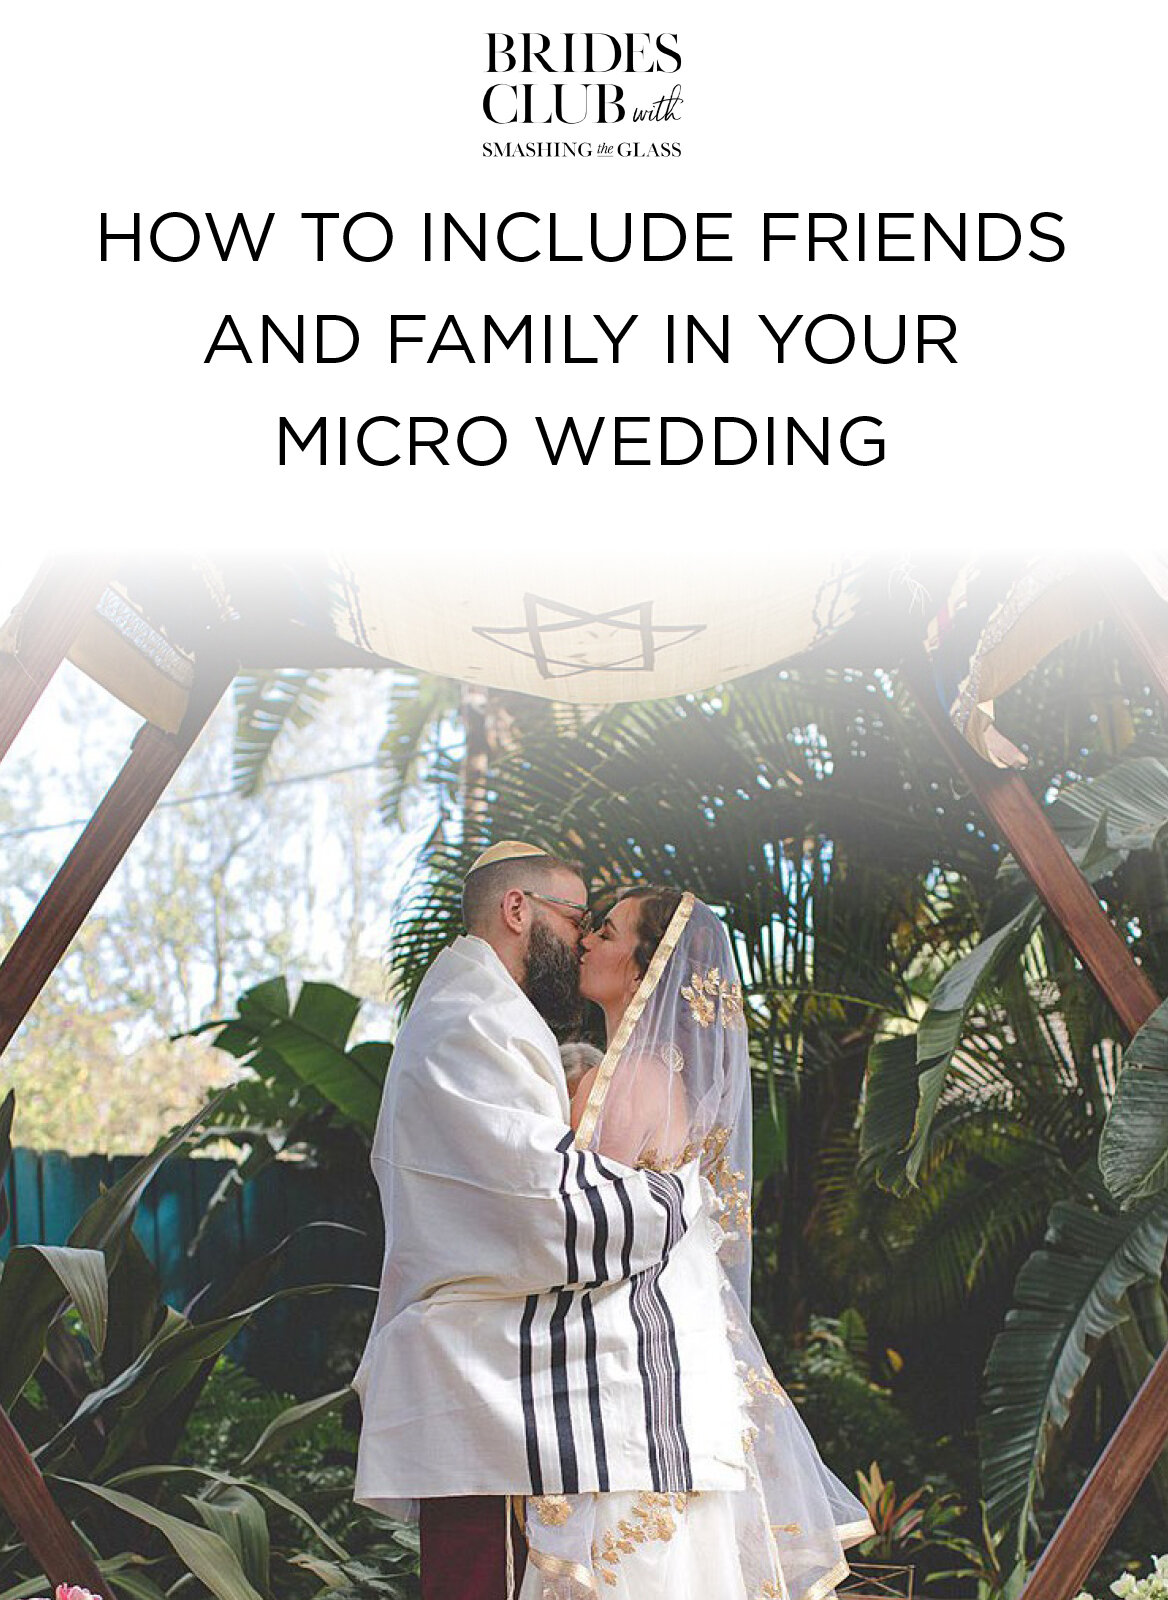 How to Include Friends and Family in your Micro Wedding